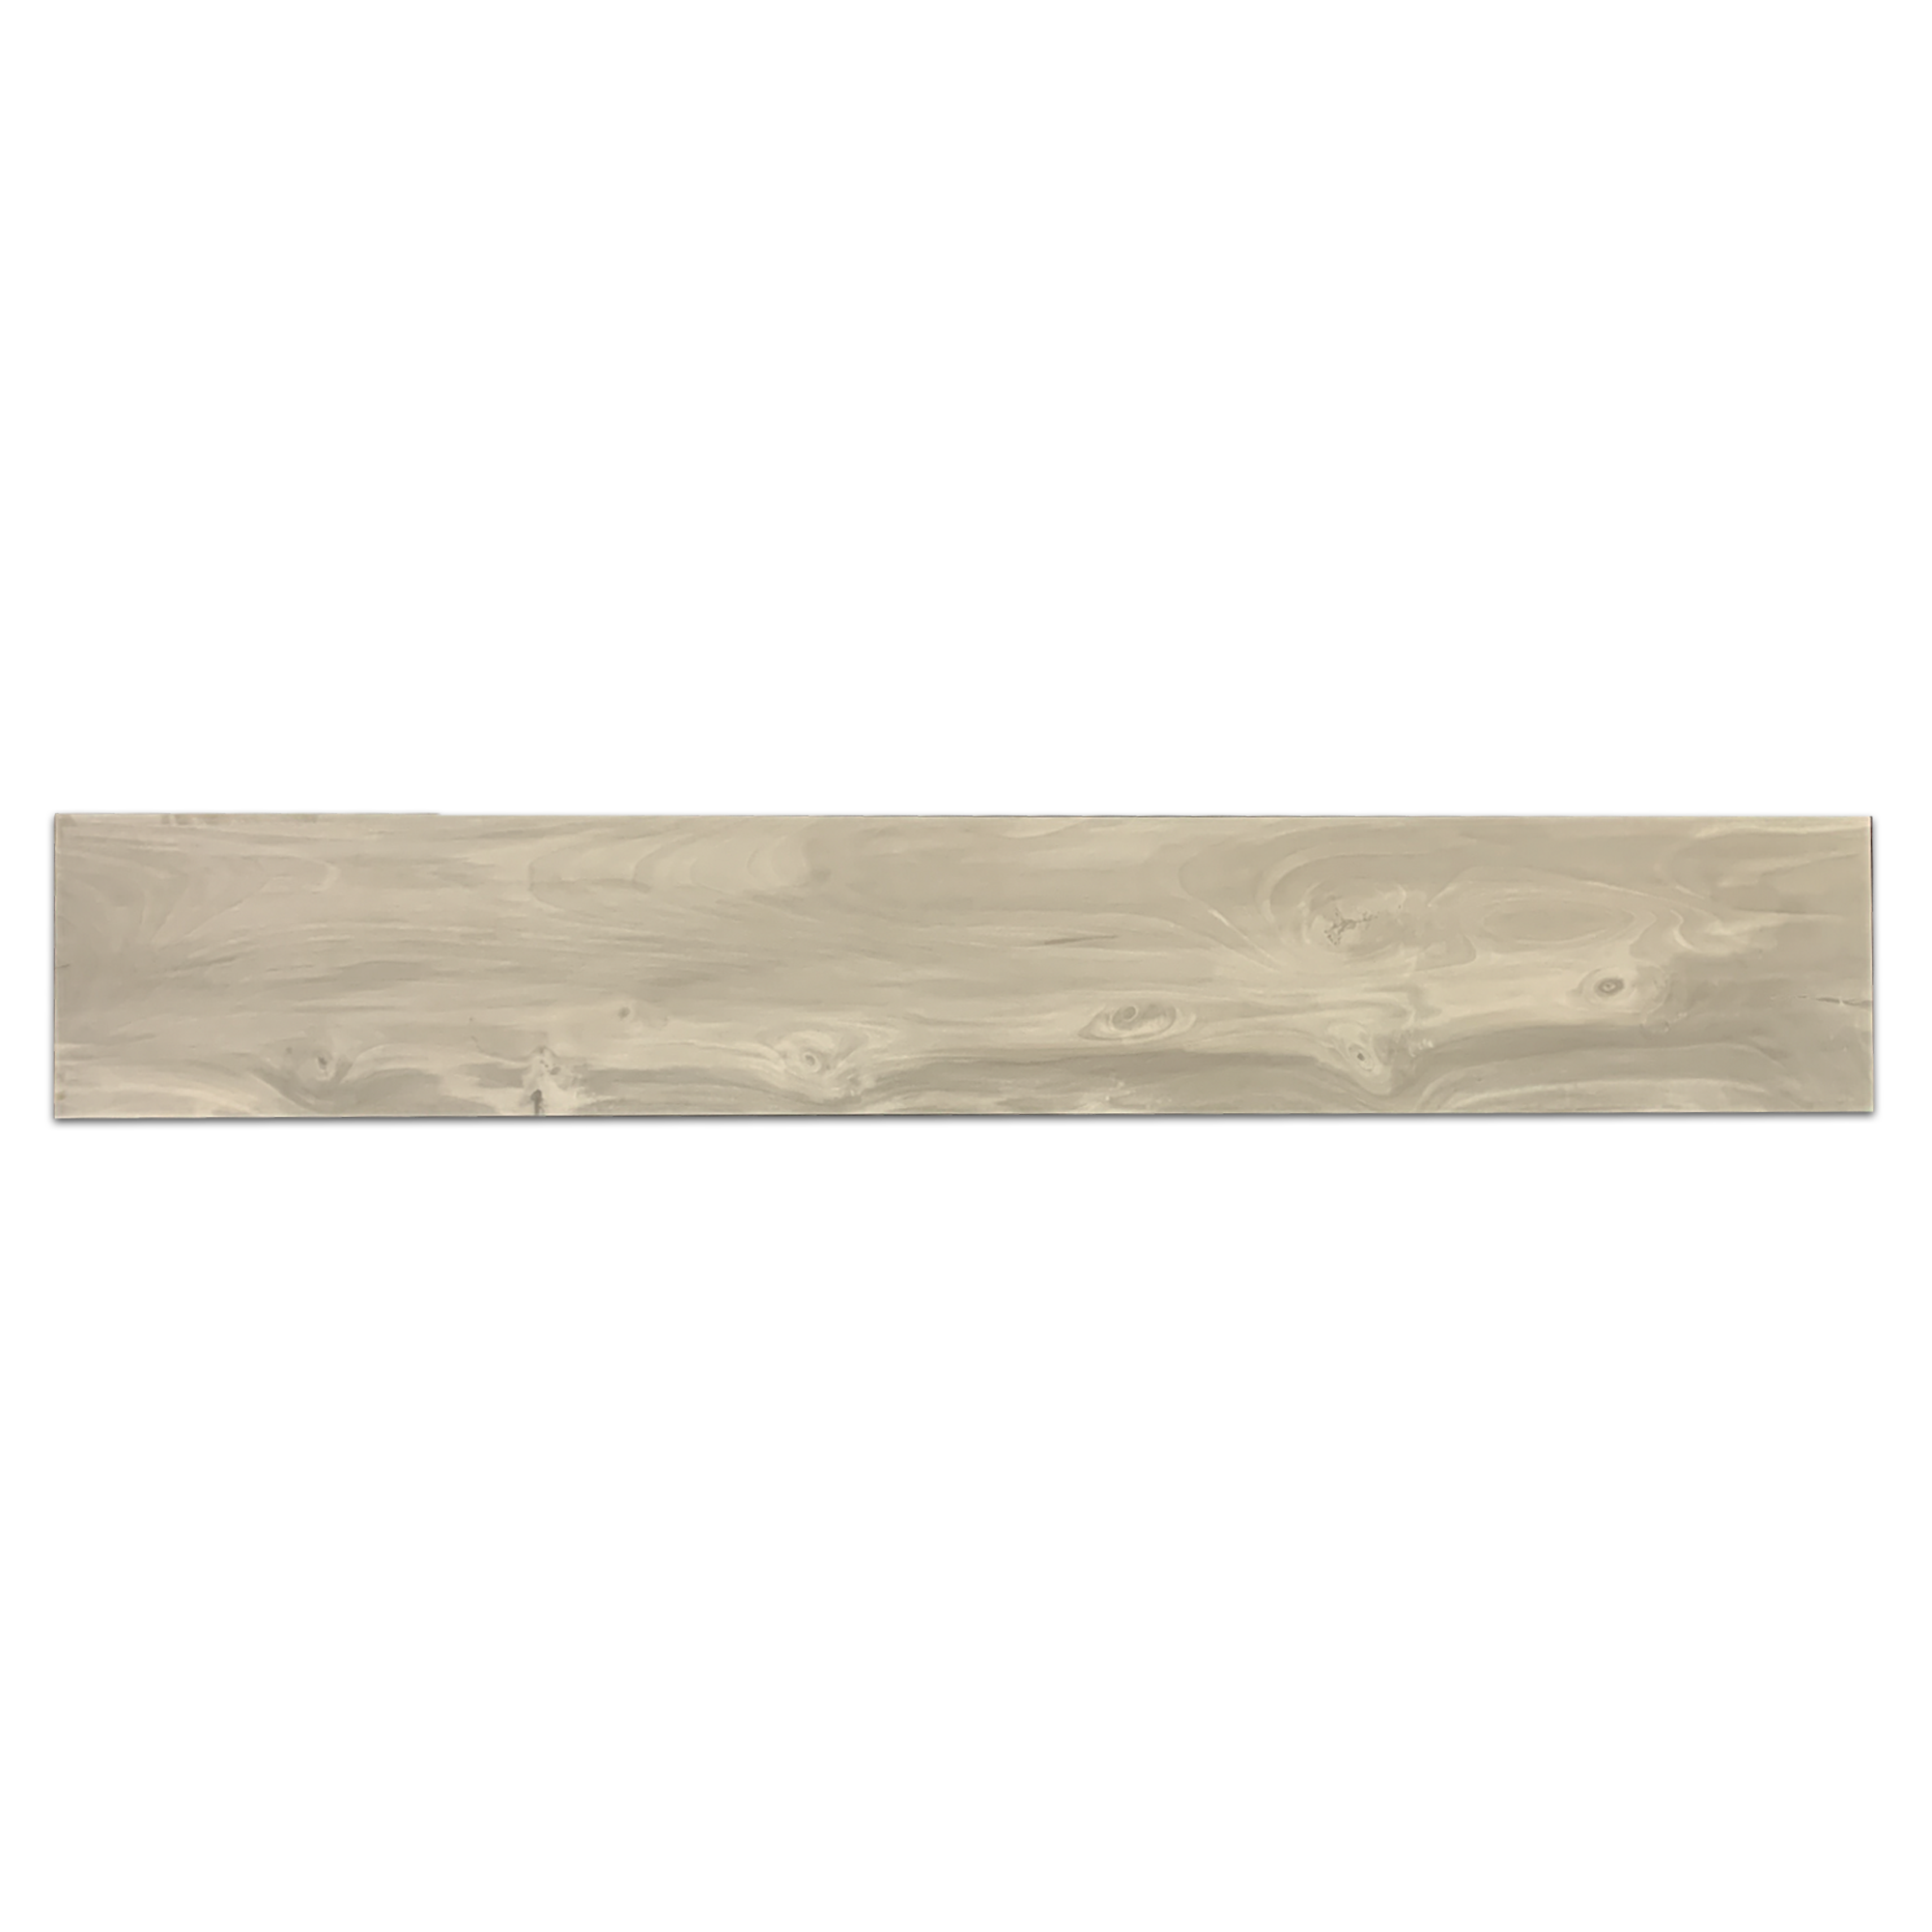 Elon Wood P Olmo Porcelain Rectangle Field Tile 8x48x0.3125 Natural Pressed WP103 Surface Group International Product